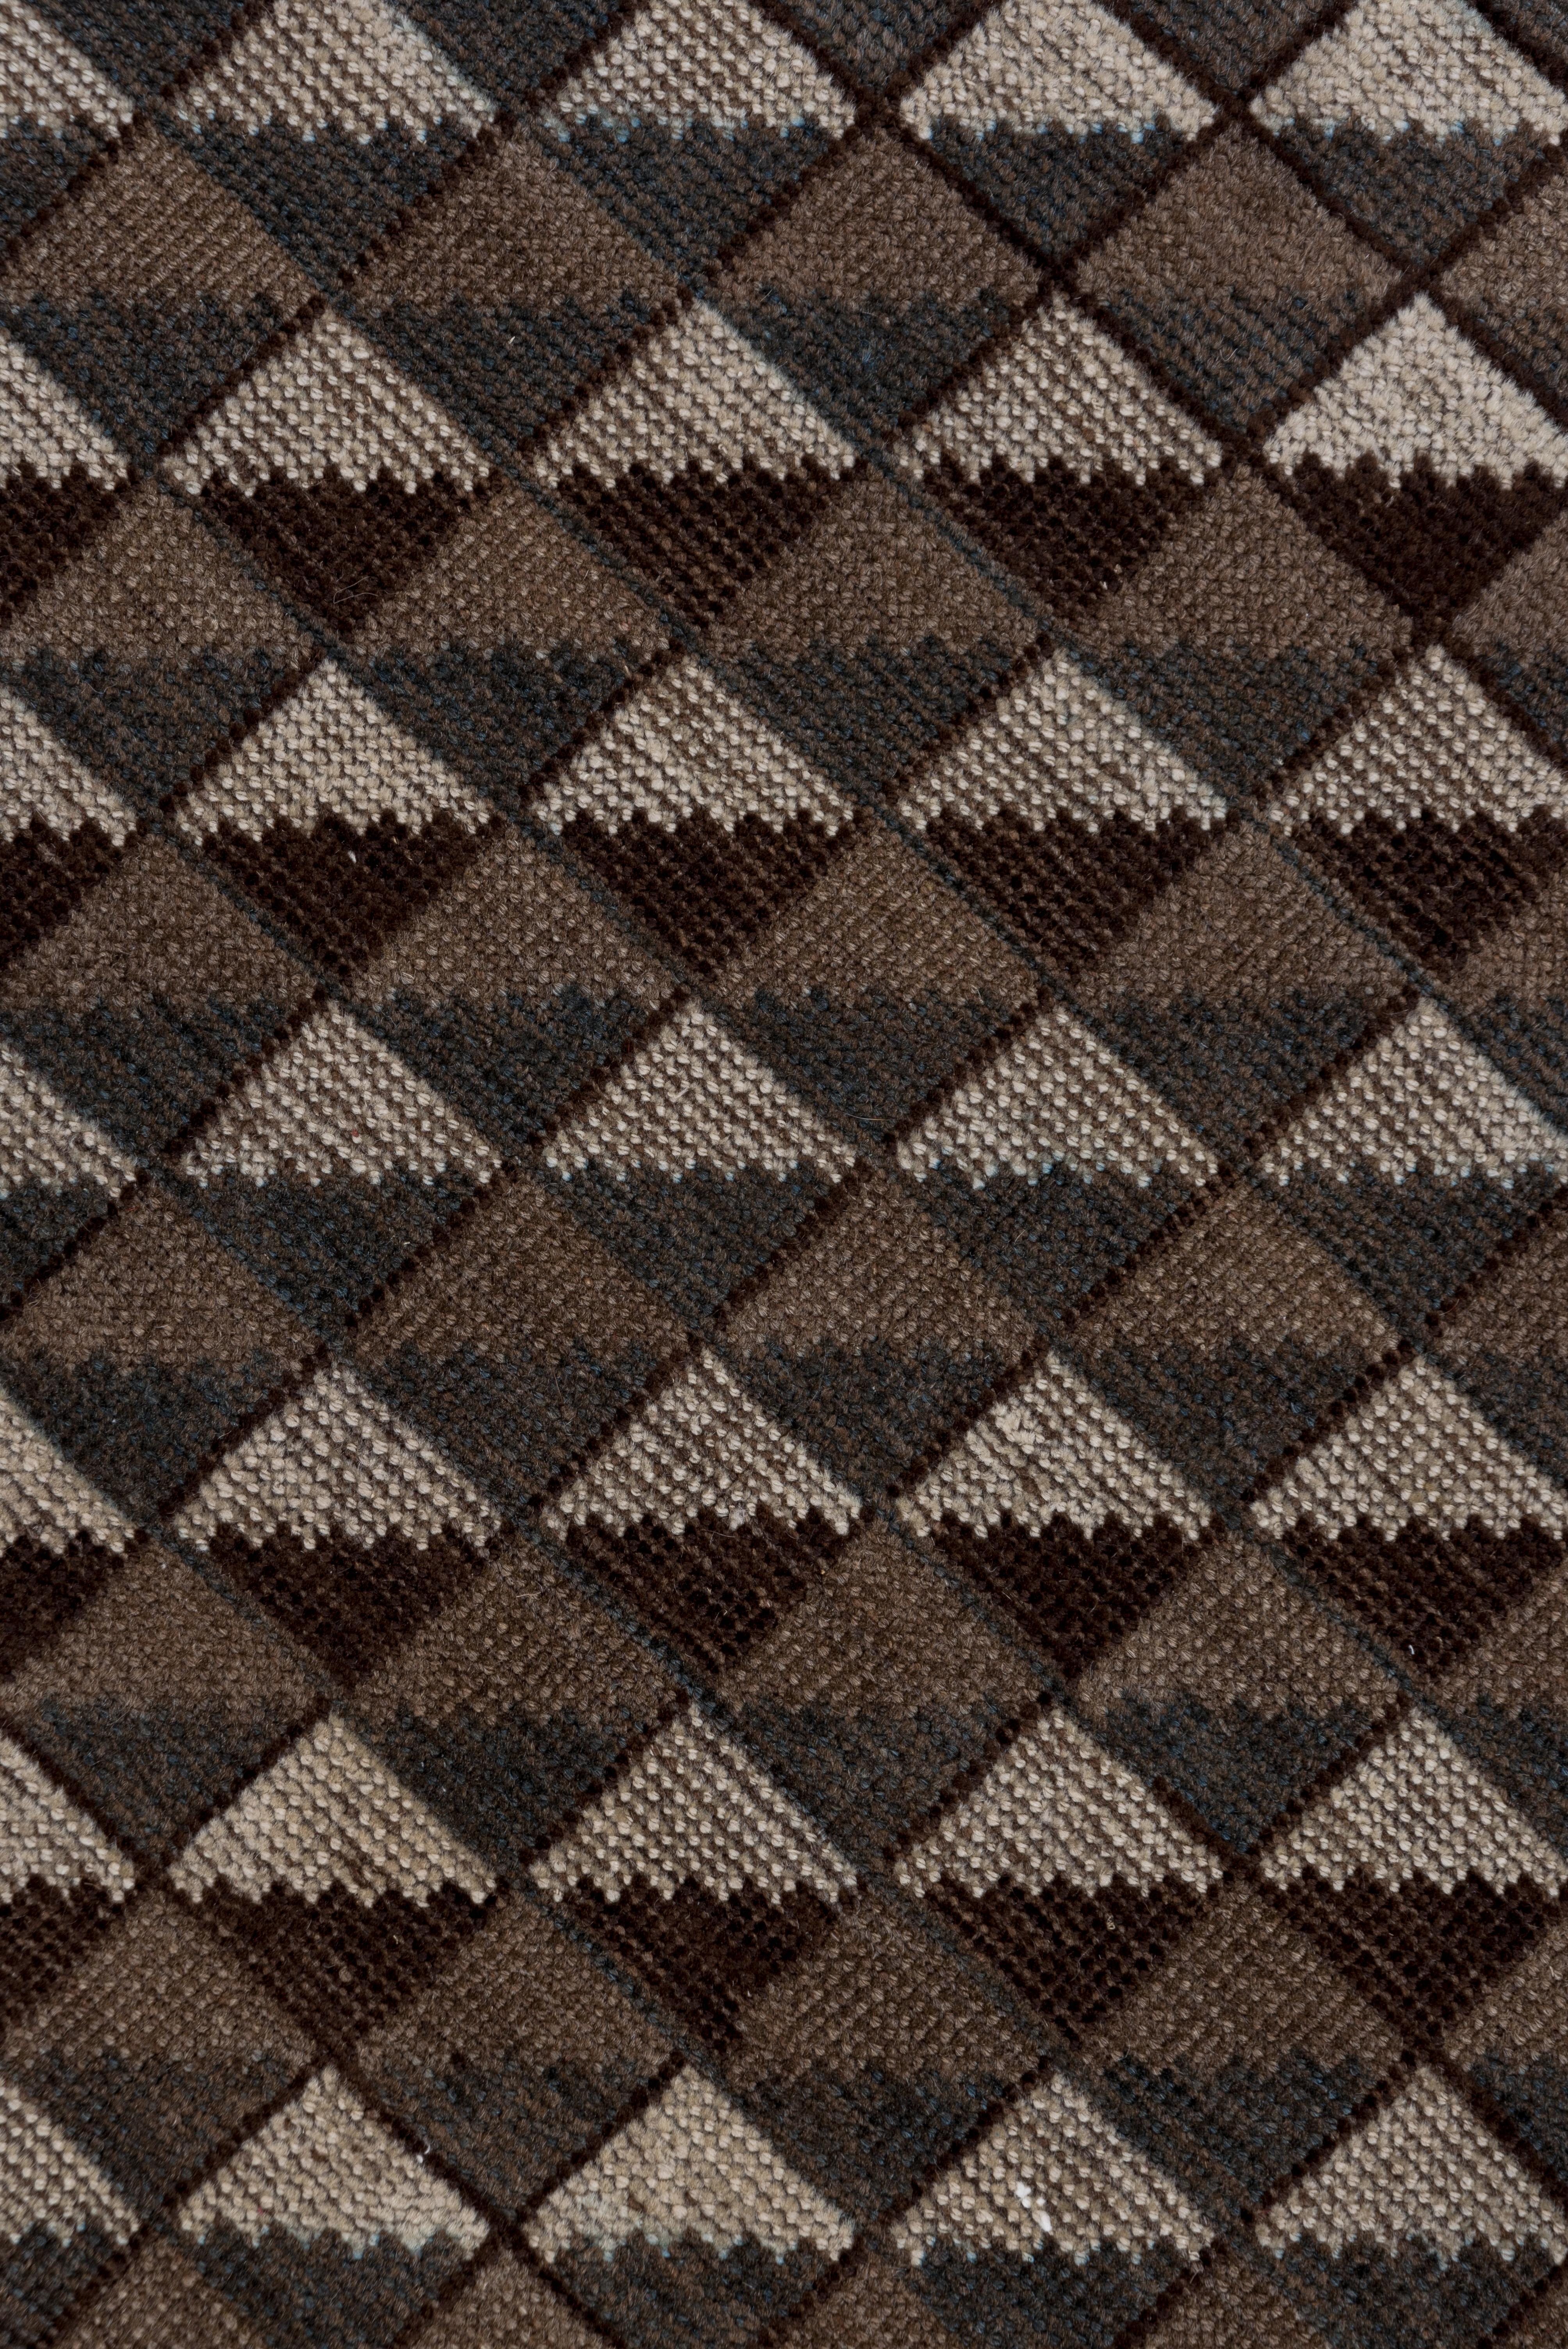 This Central Asian tribal carpet shows a triangle mosaic pattern in old ivory and brown tones within a very narrow flip-flop undulating vine and profile palmette border.